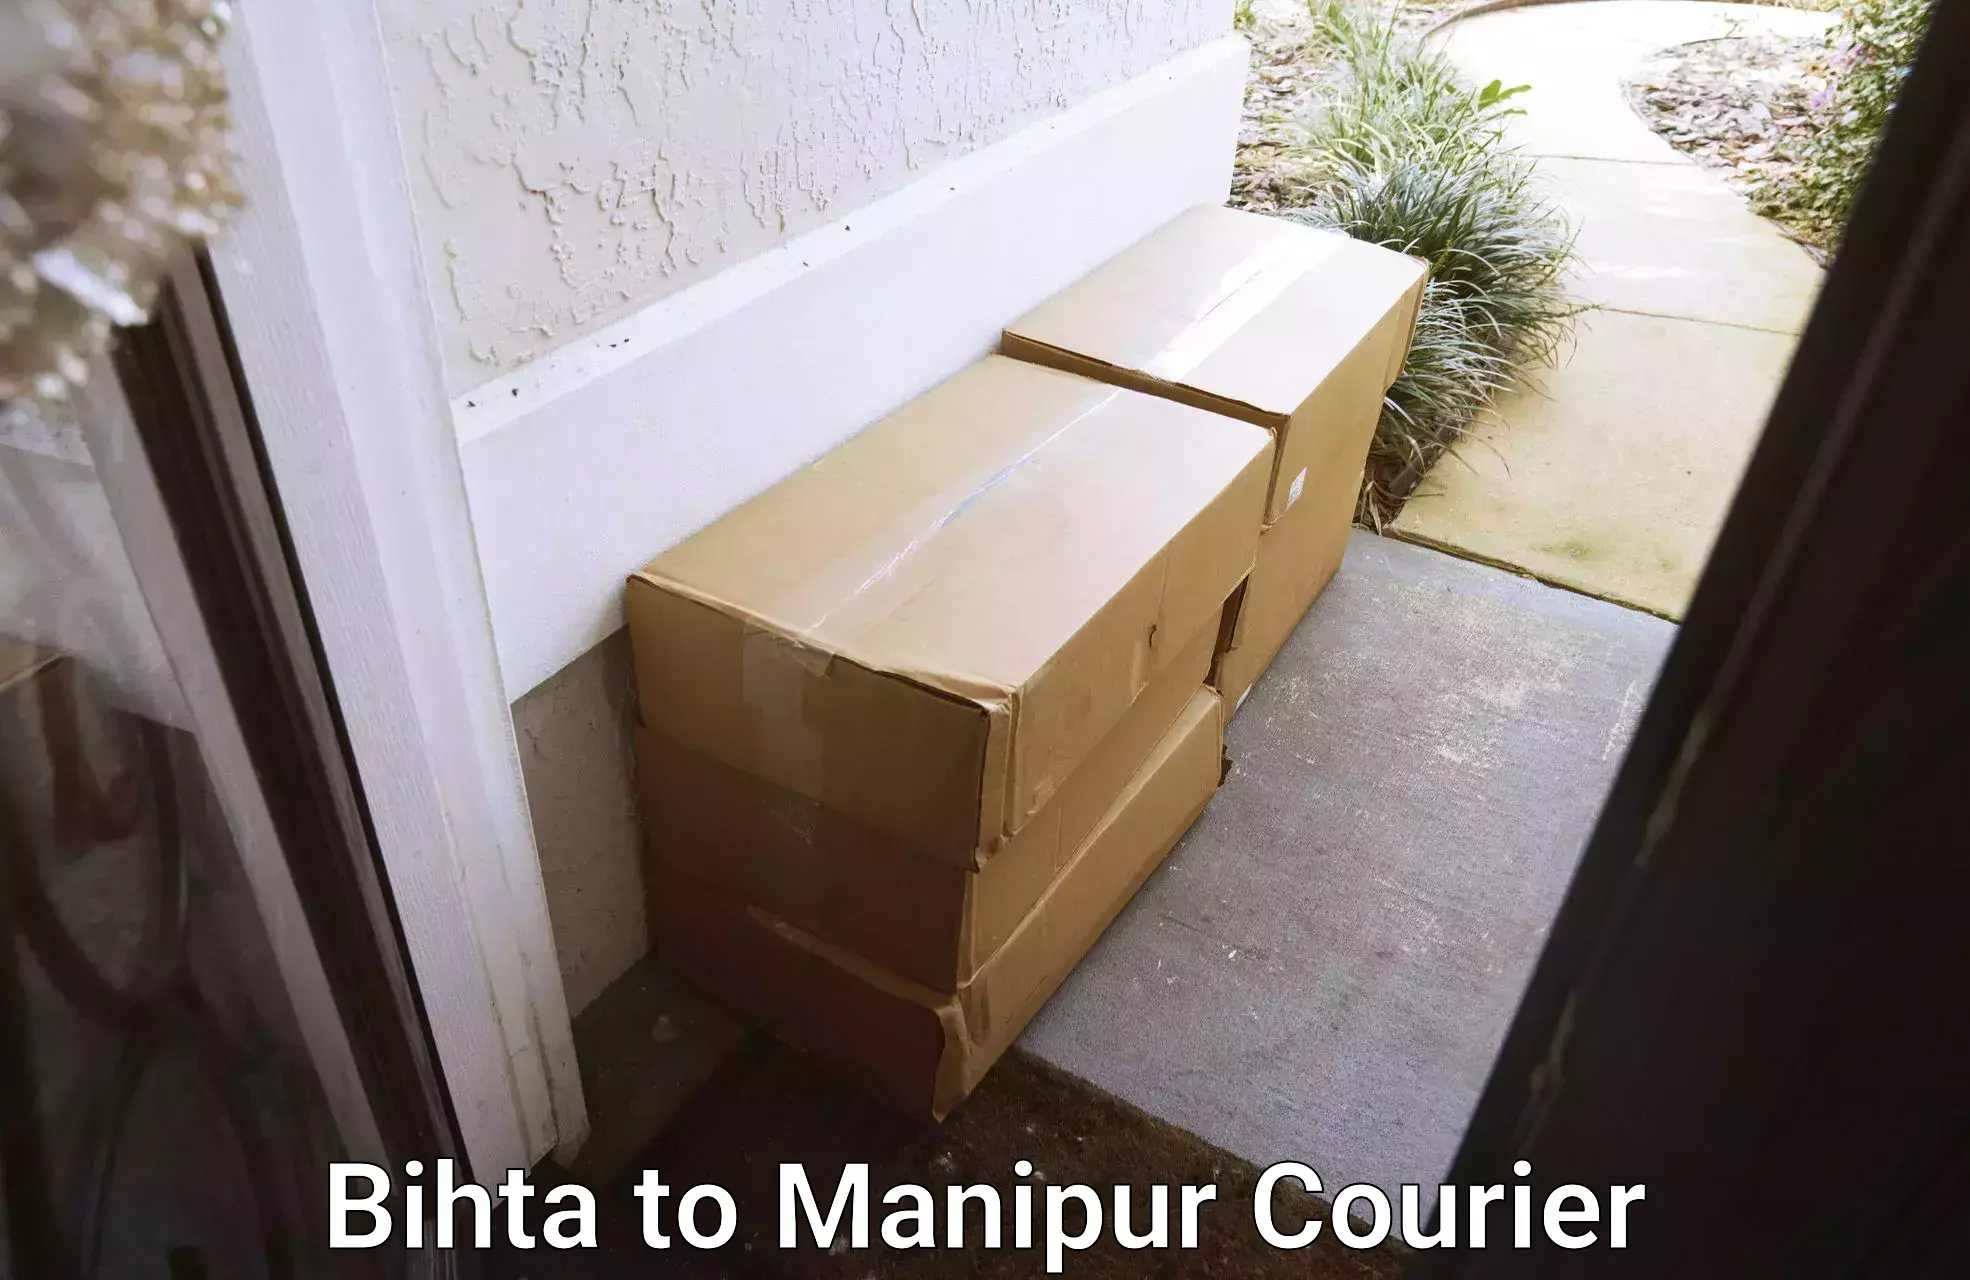 Professional movers Bihta to Manipur